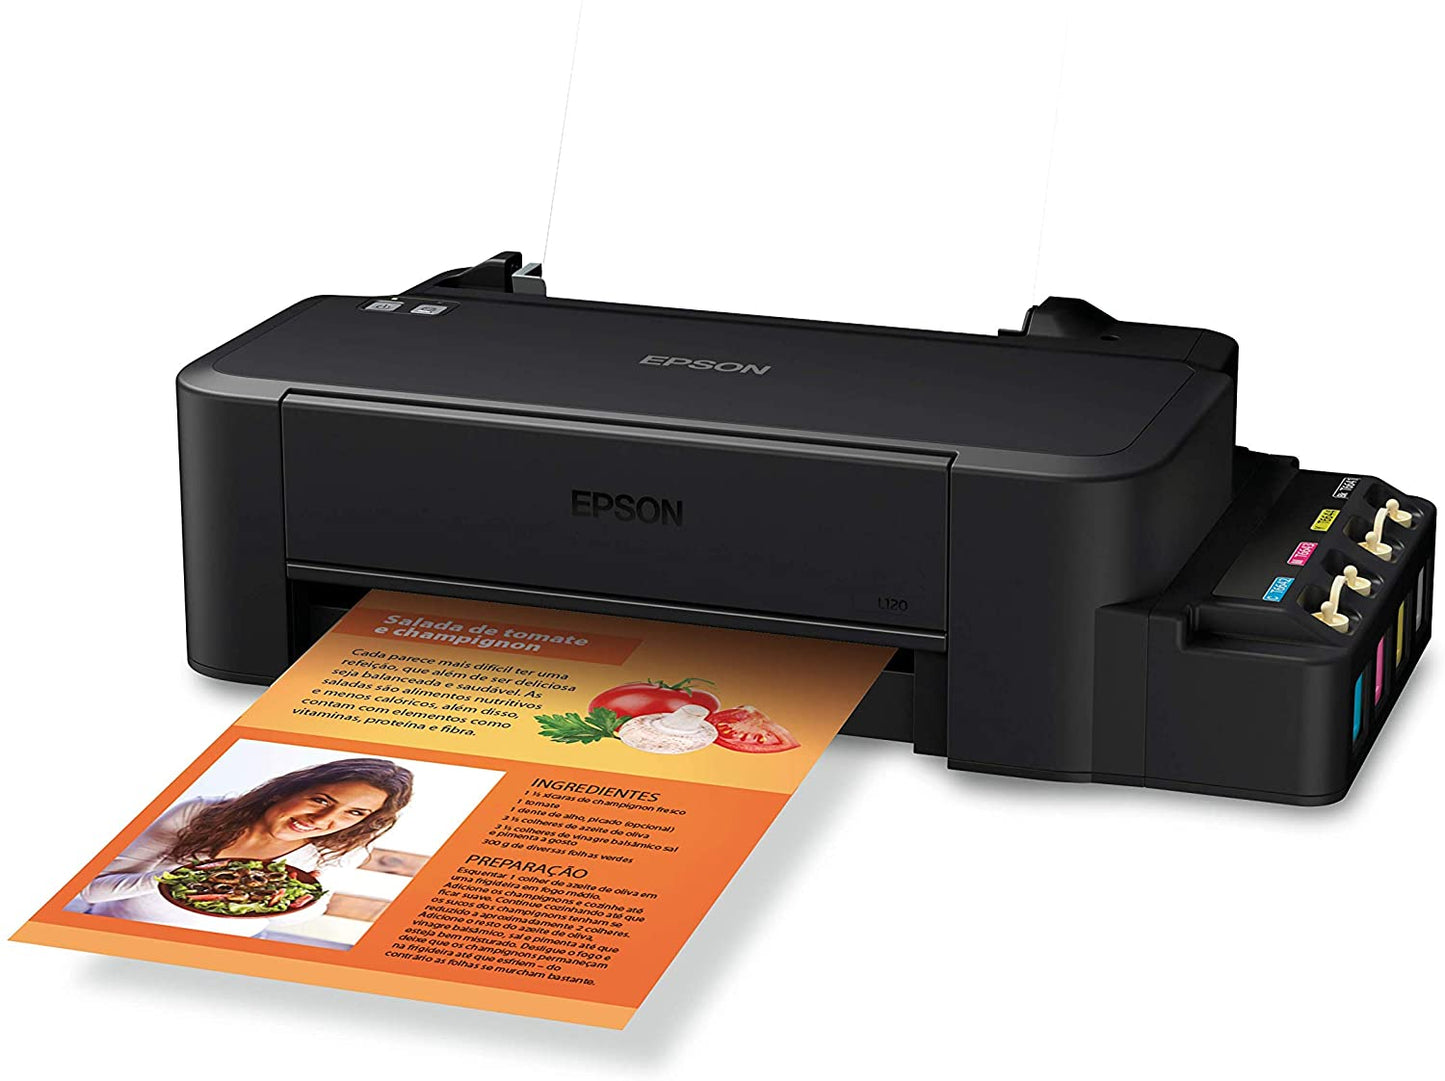 Epson EcoTank L121 A4 Ink Tank Colored Printer with Ink Efficient and Ultra-High Page Yield, 9.0 ipm Print Speed, Heat-Free Technology with USB 2.0 for Home and Commercial Use